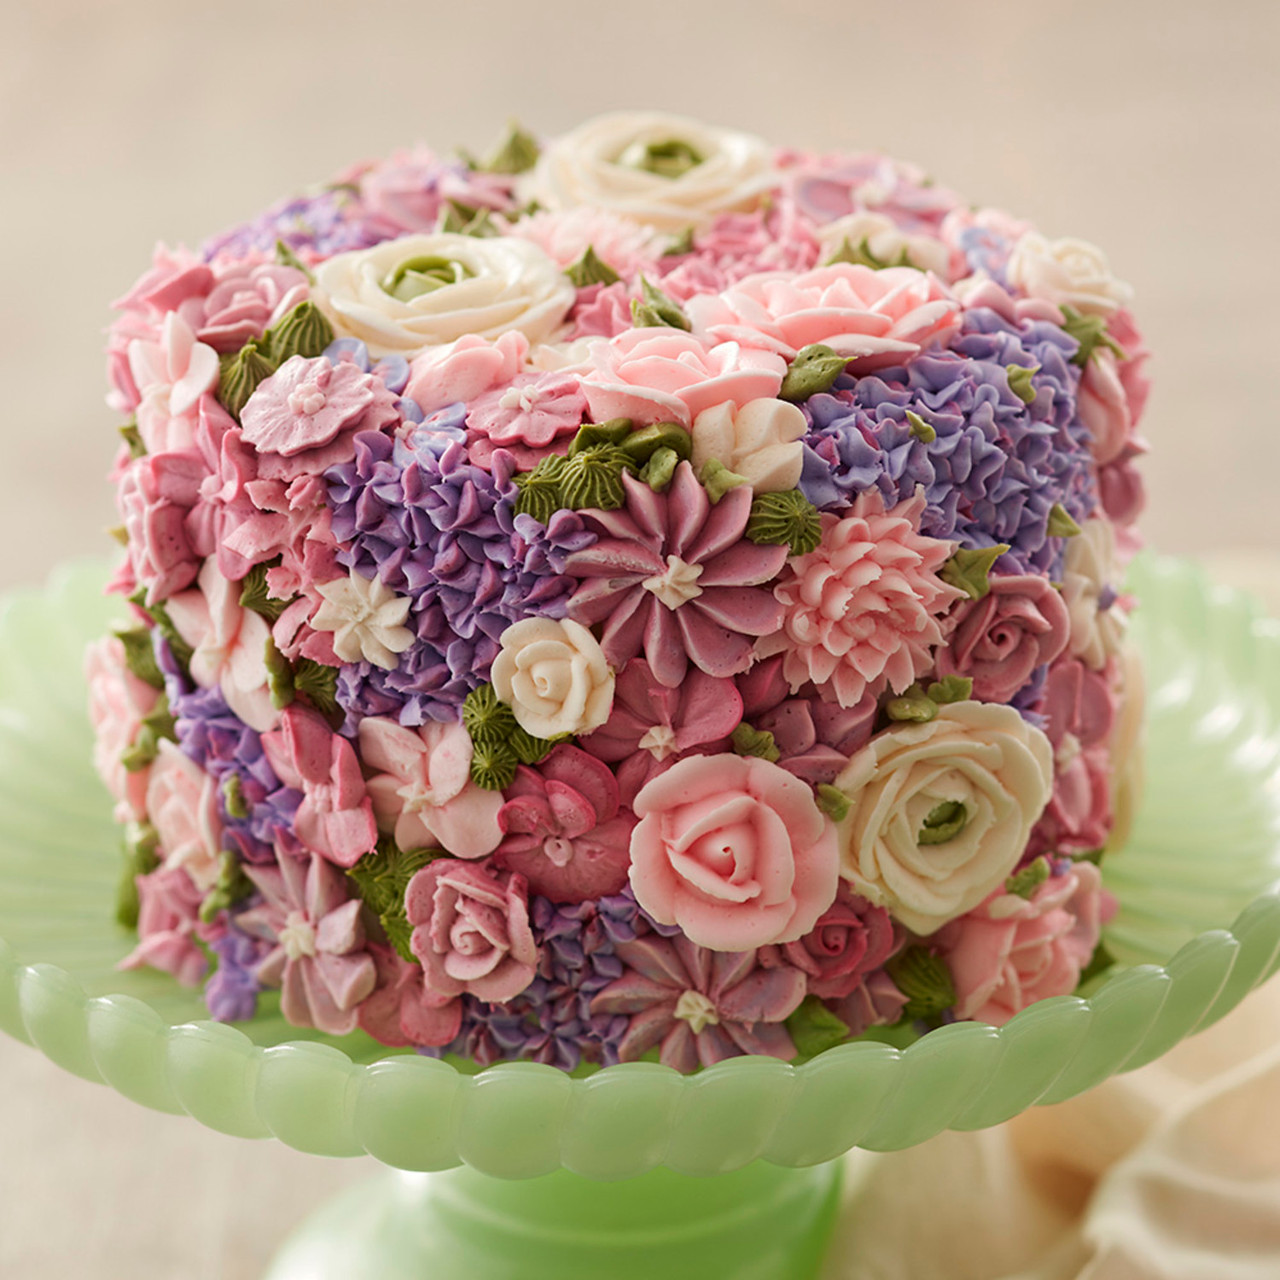 Flower Cake Ideas: Blossoming Beauty in Baking